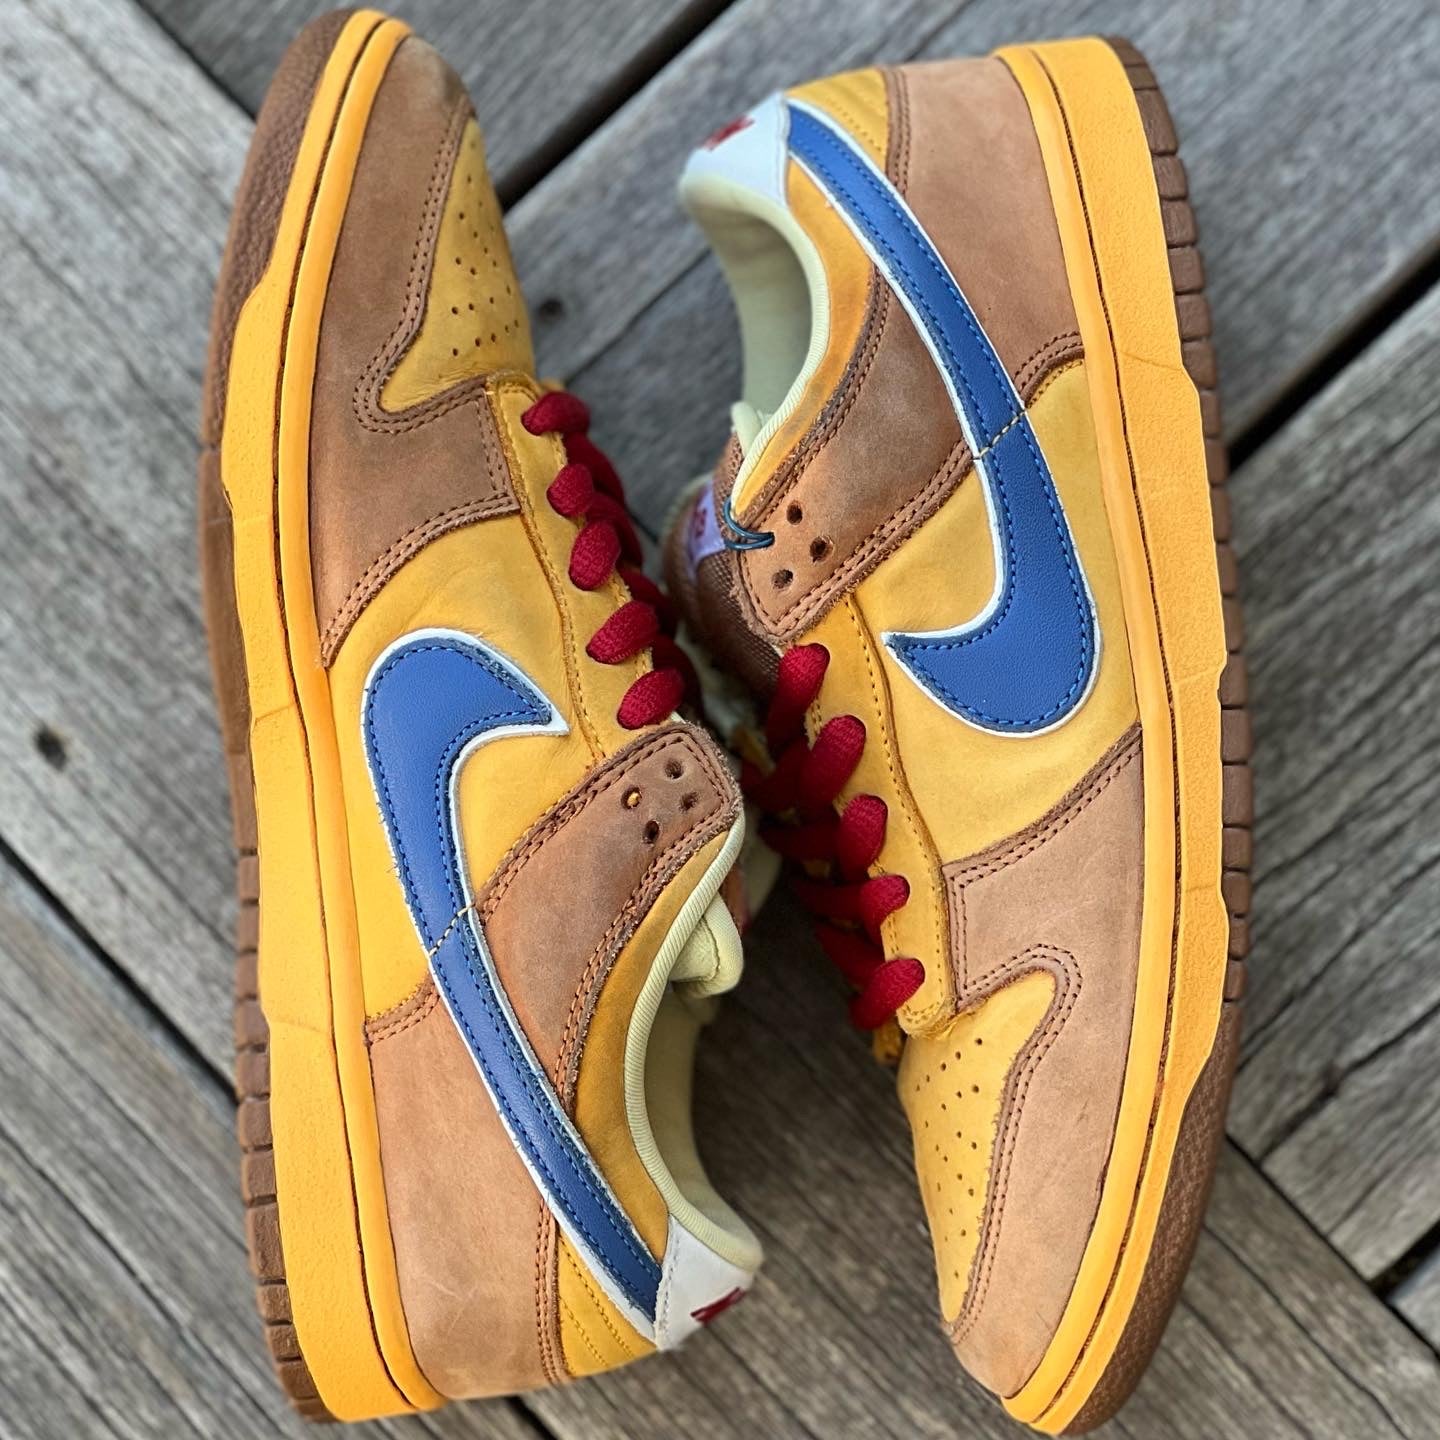 nike sb dunk low newcastle brown ale mens stores